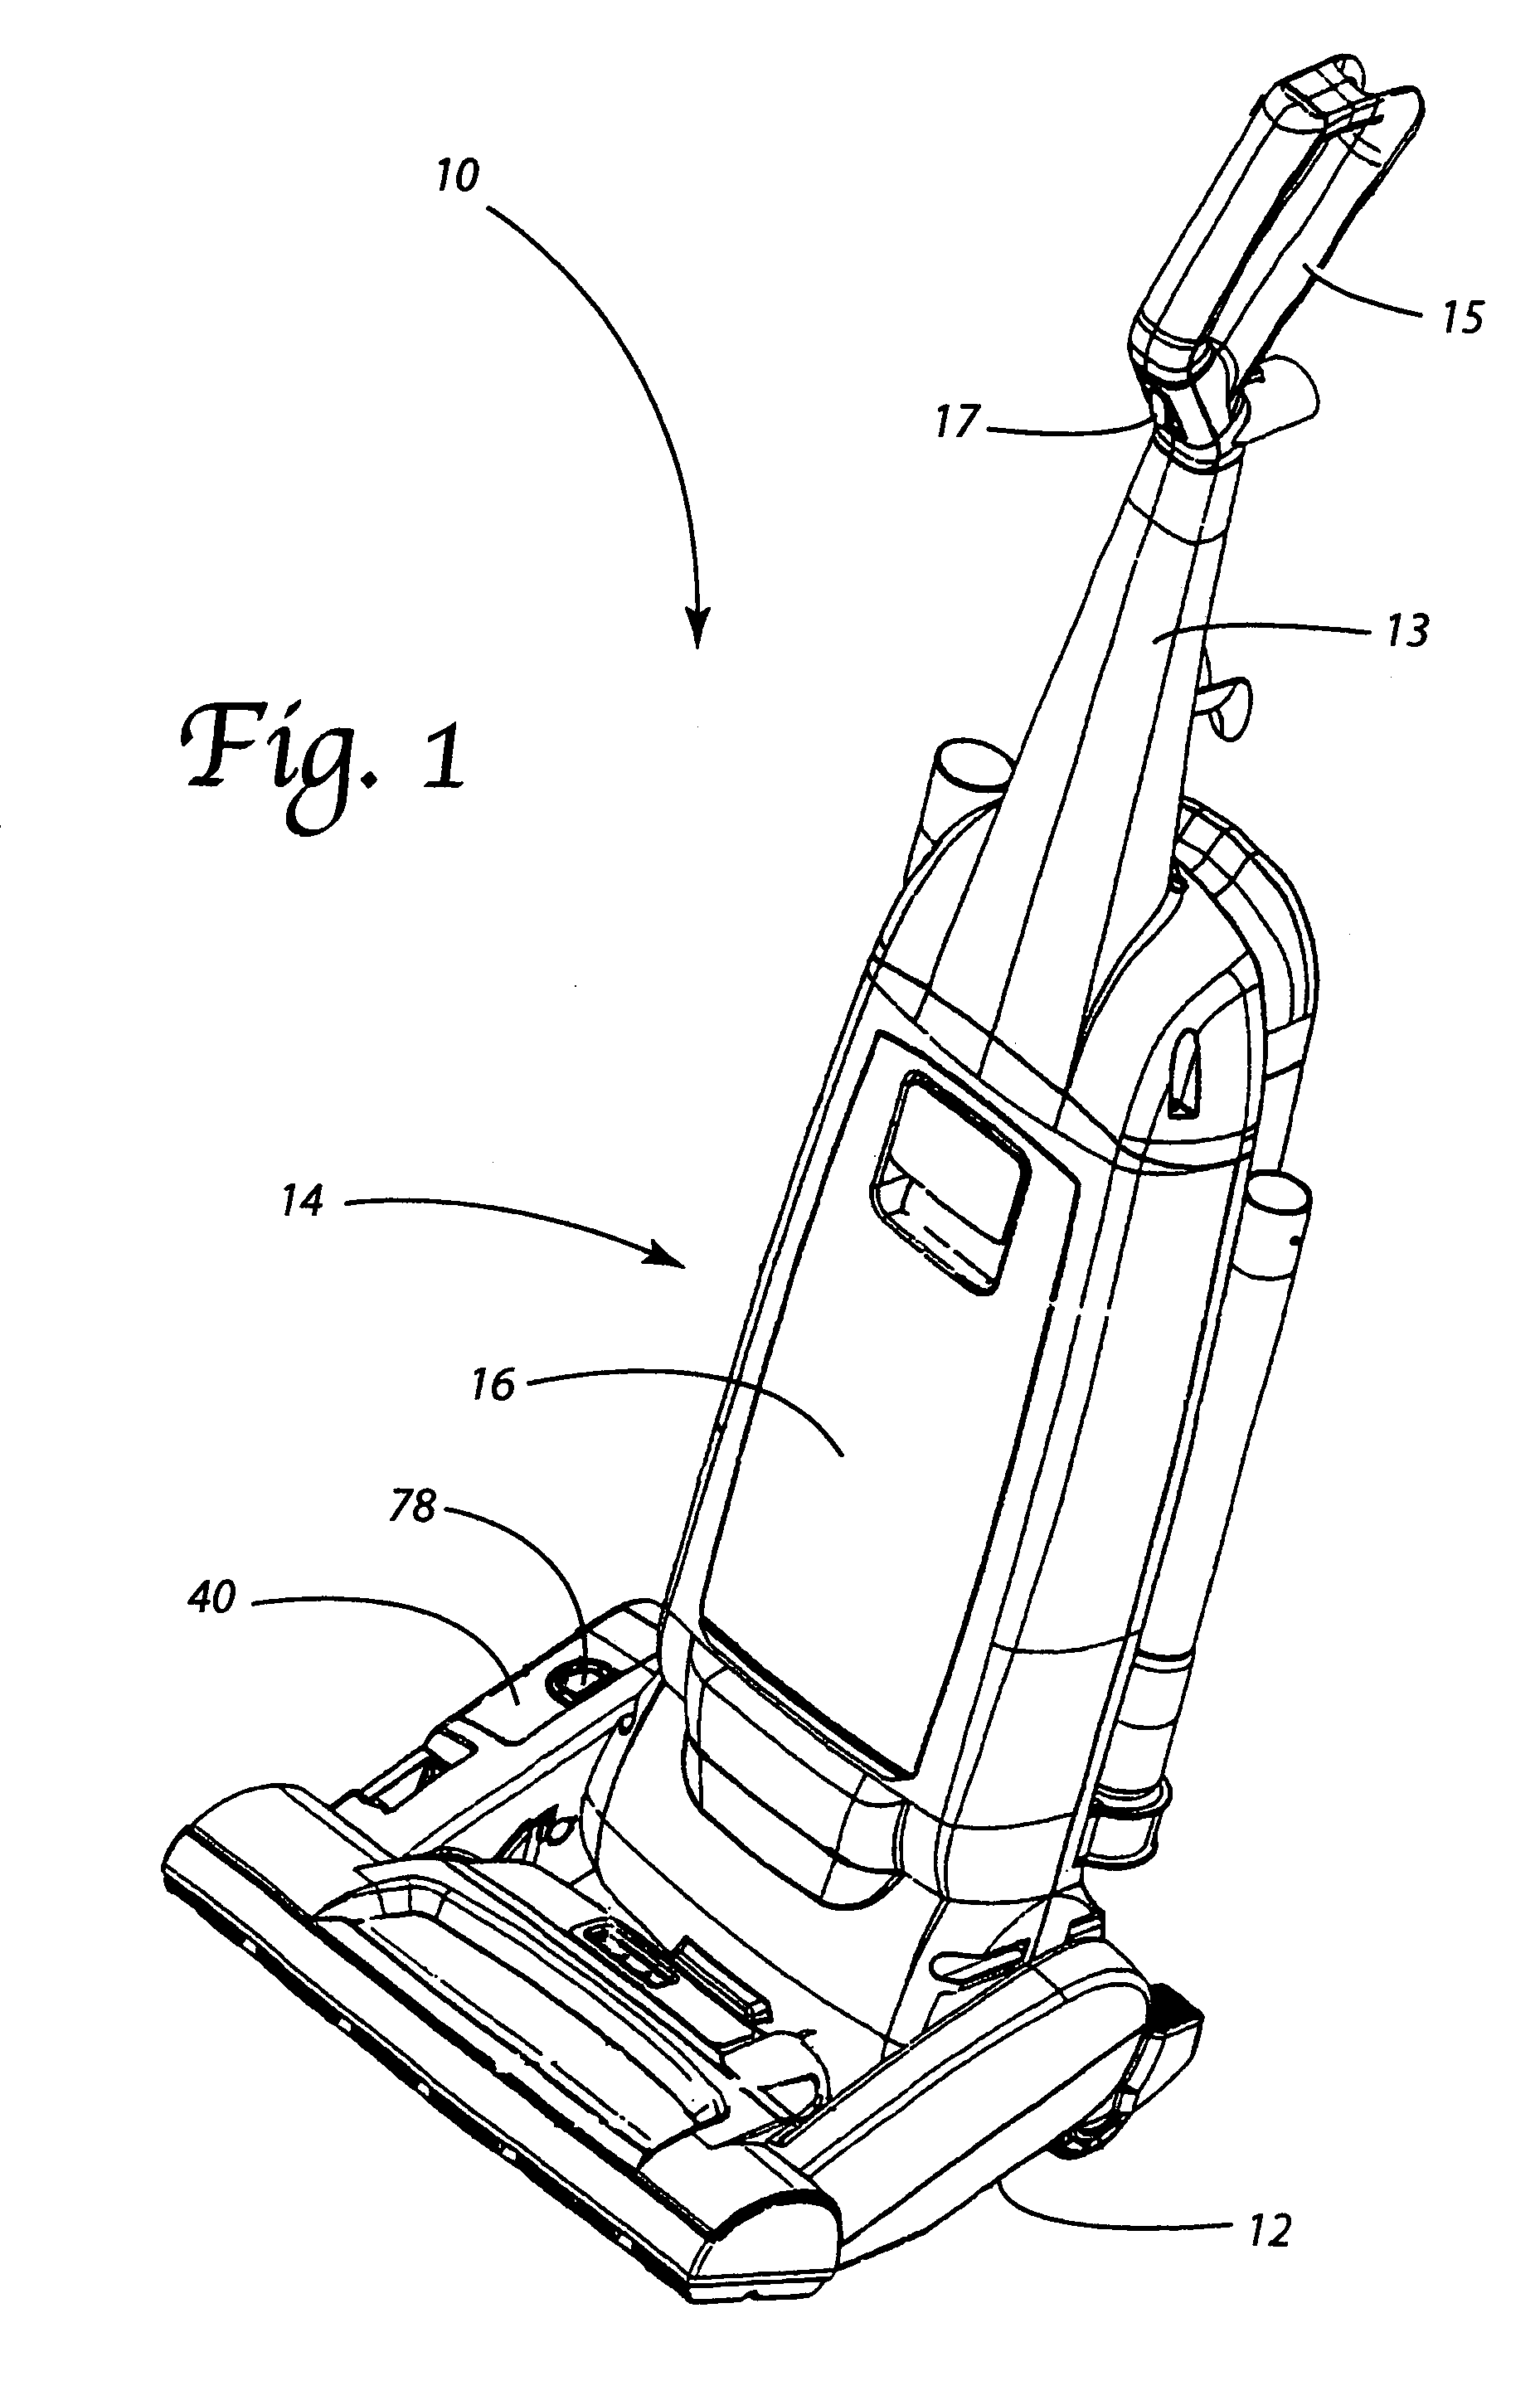 Nozzle assembly housing for vacuum cleaner